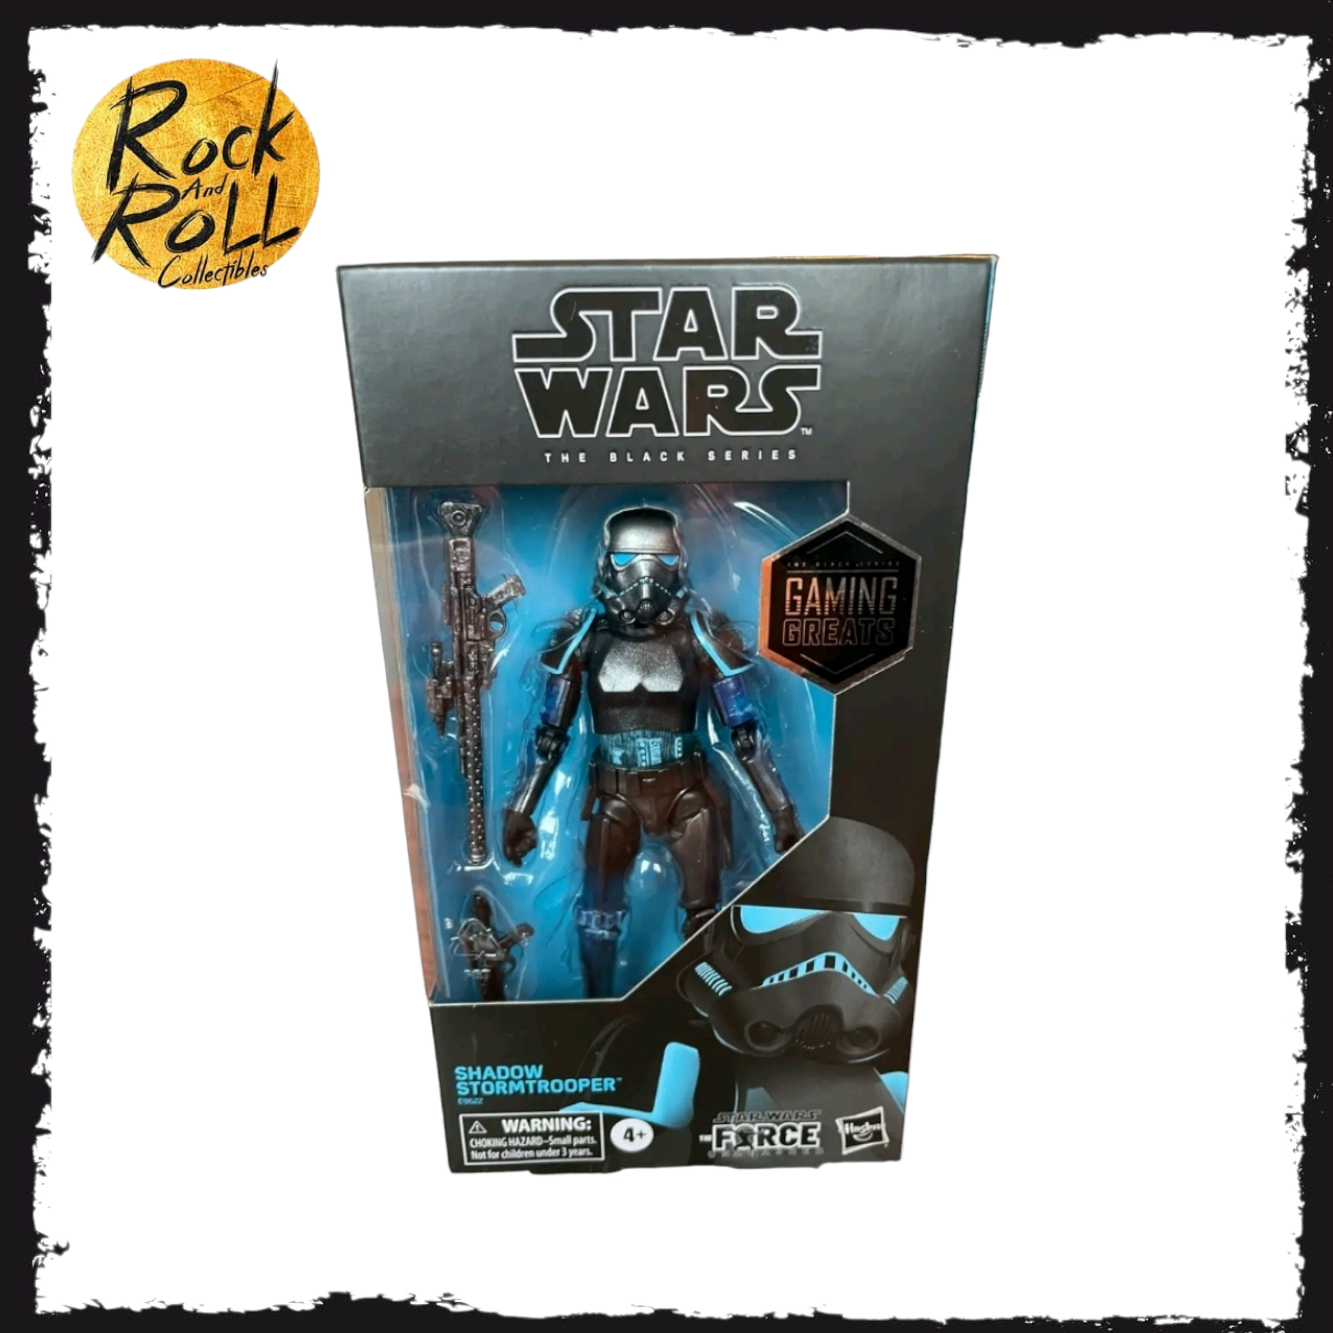 Star Wars The Black Series Shadow Stormtrooper The Force